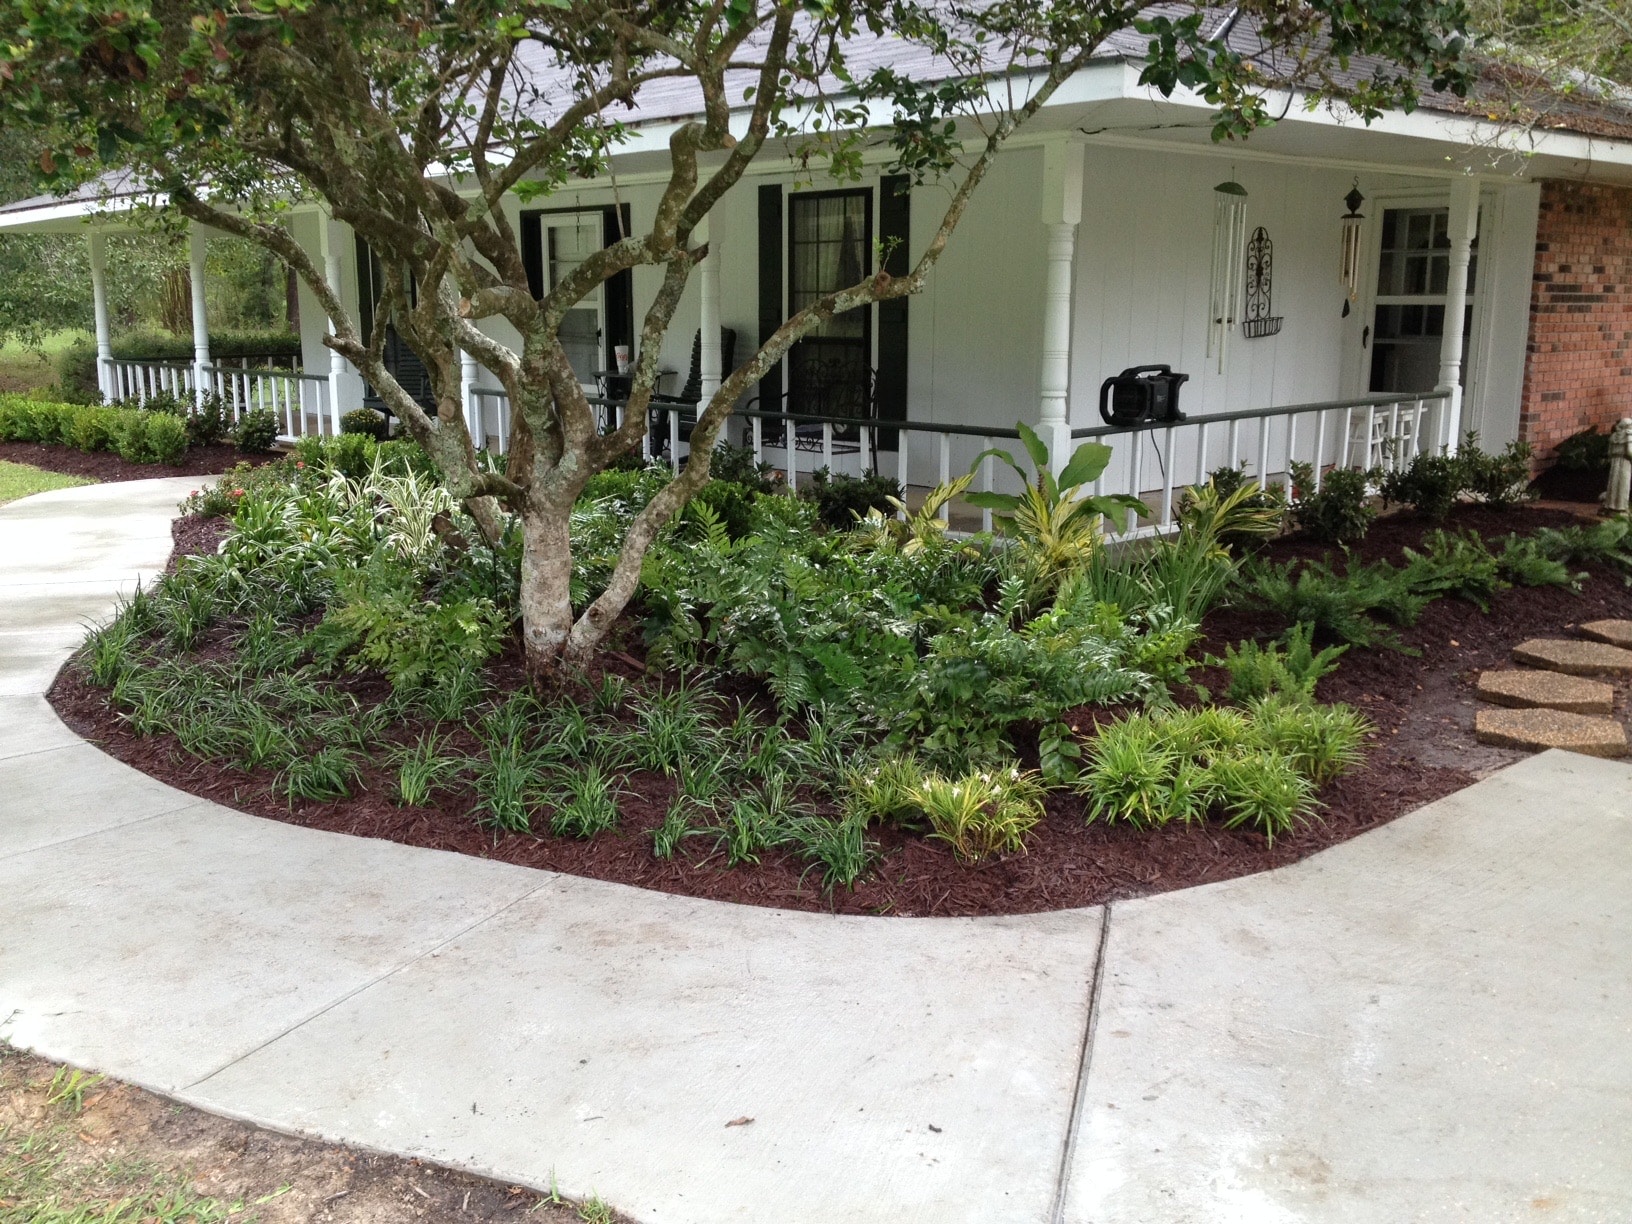 Shady Bed Landscape Design And Architecture - Baton Rouge